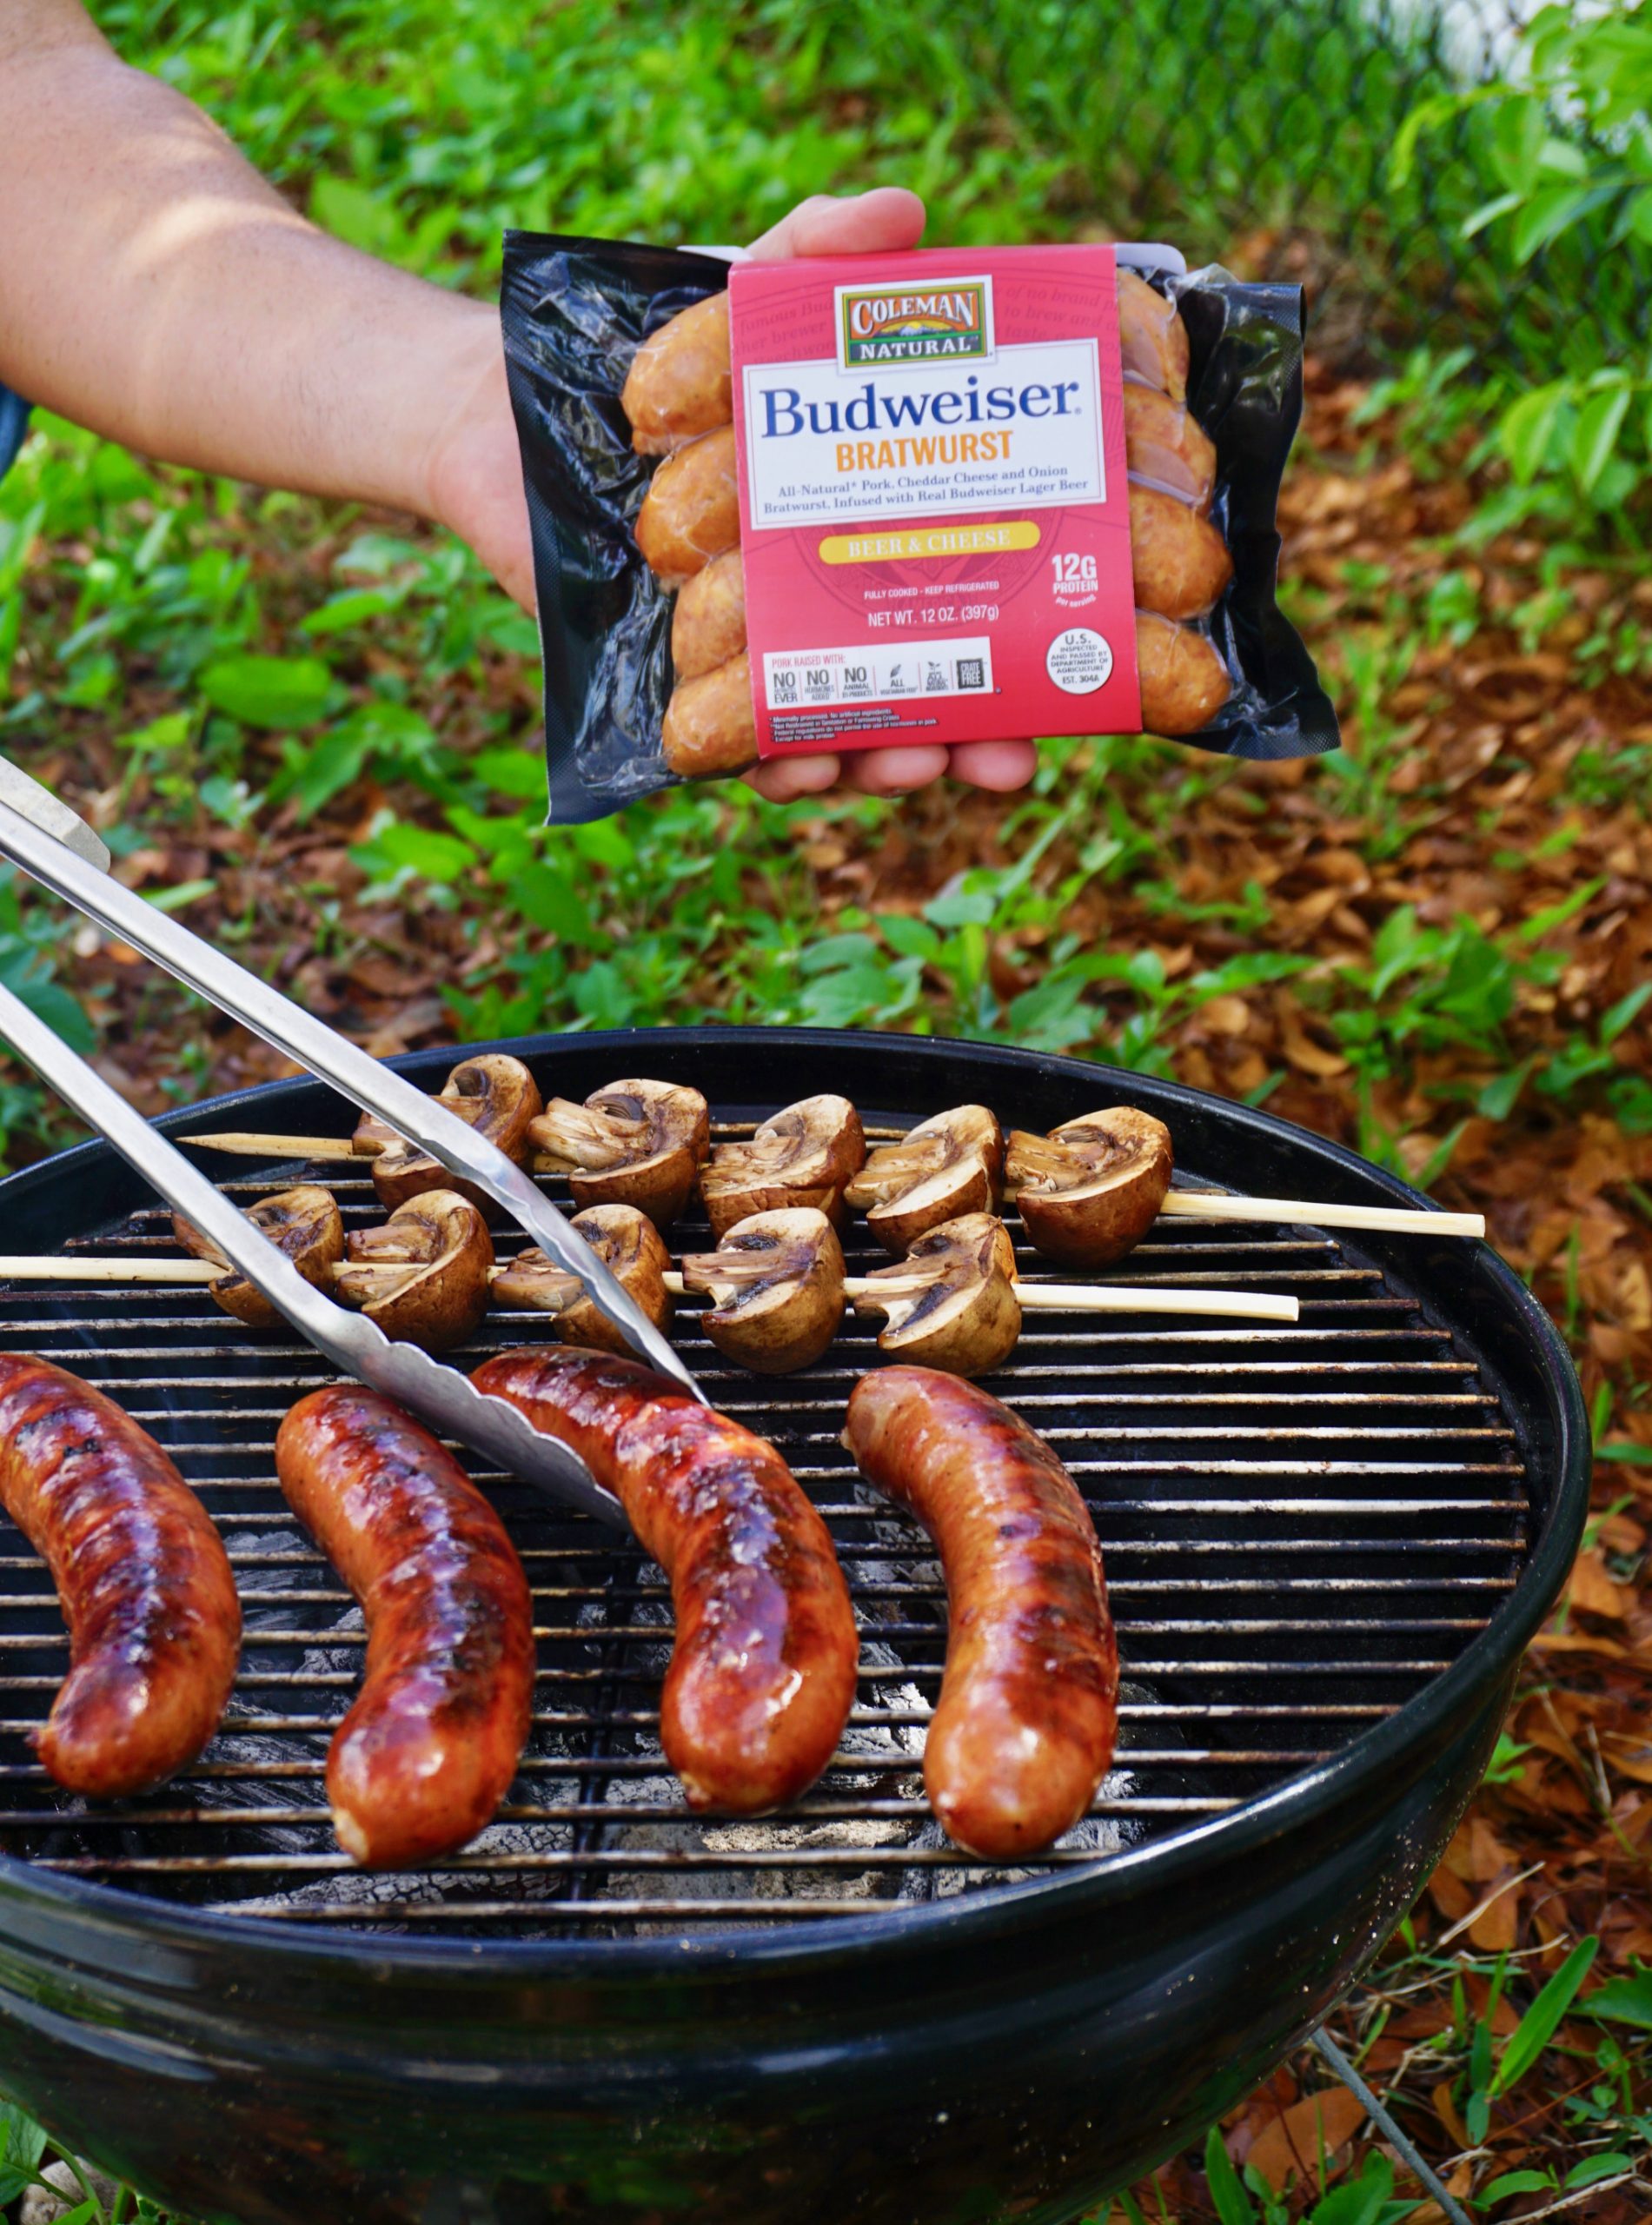 perfect pairings for BBQ brats